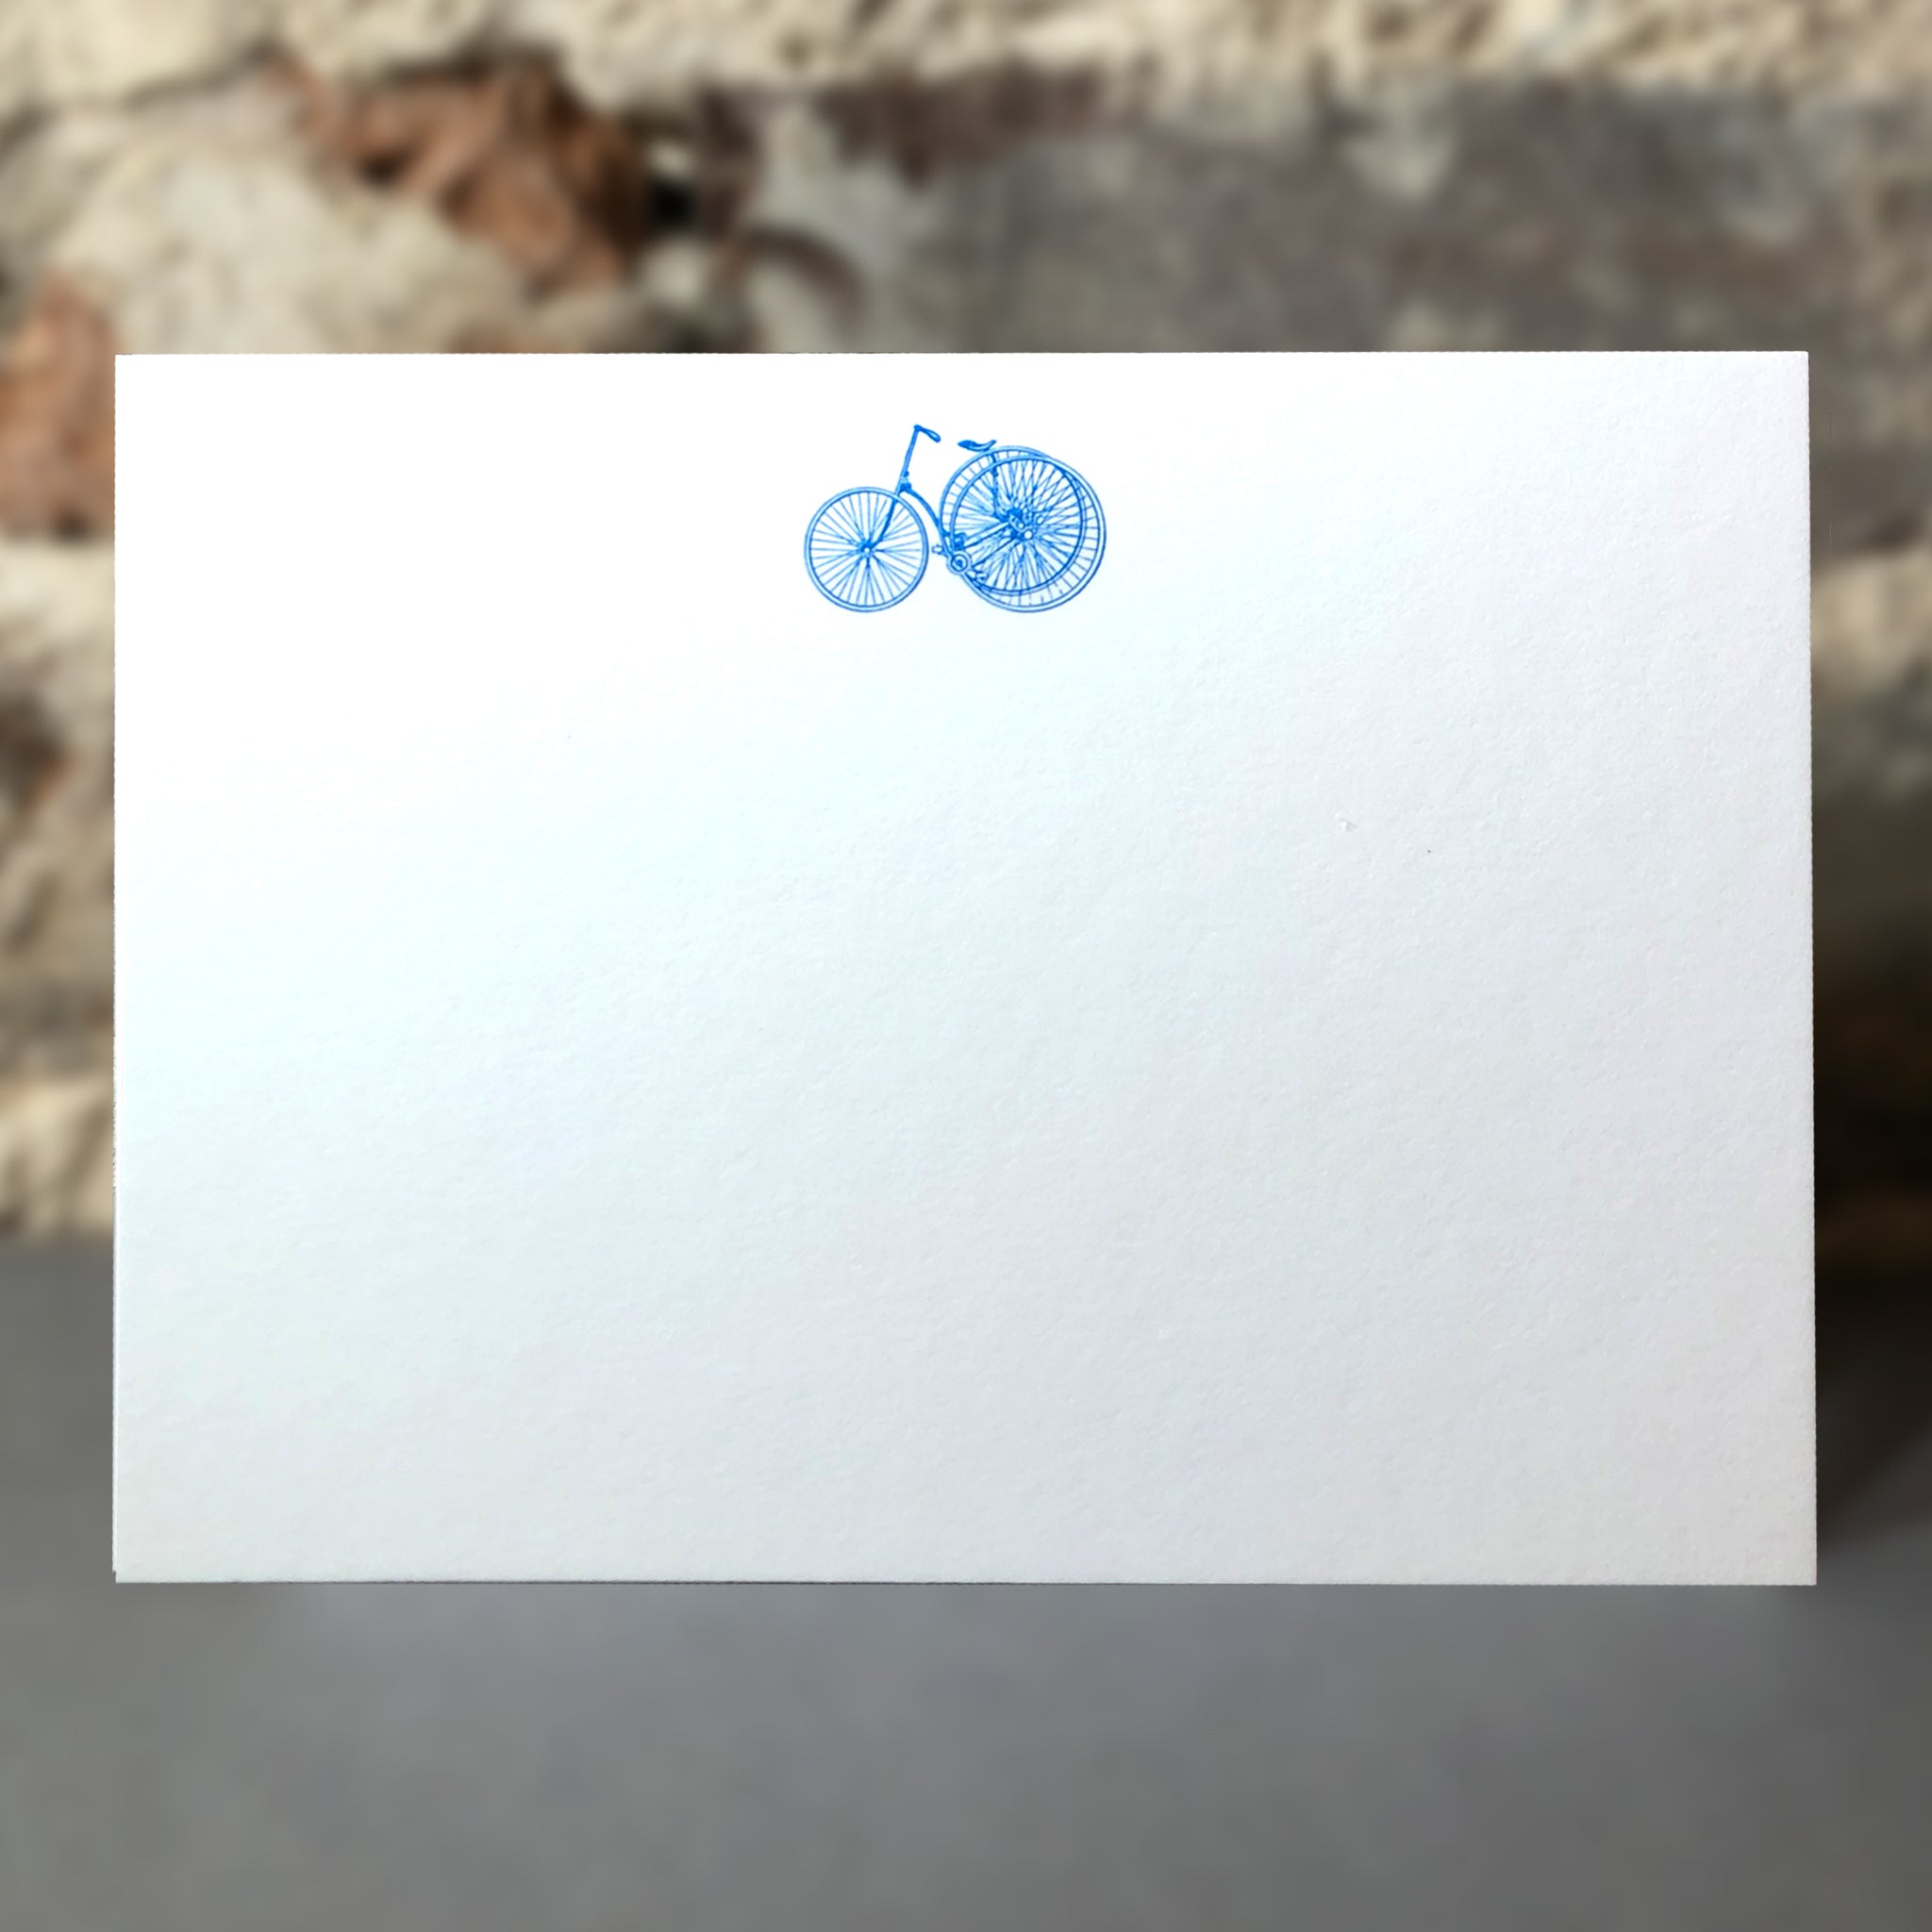 Engraved 3-Wheel Bicycle Jotter